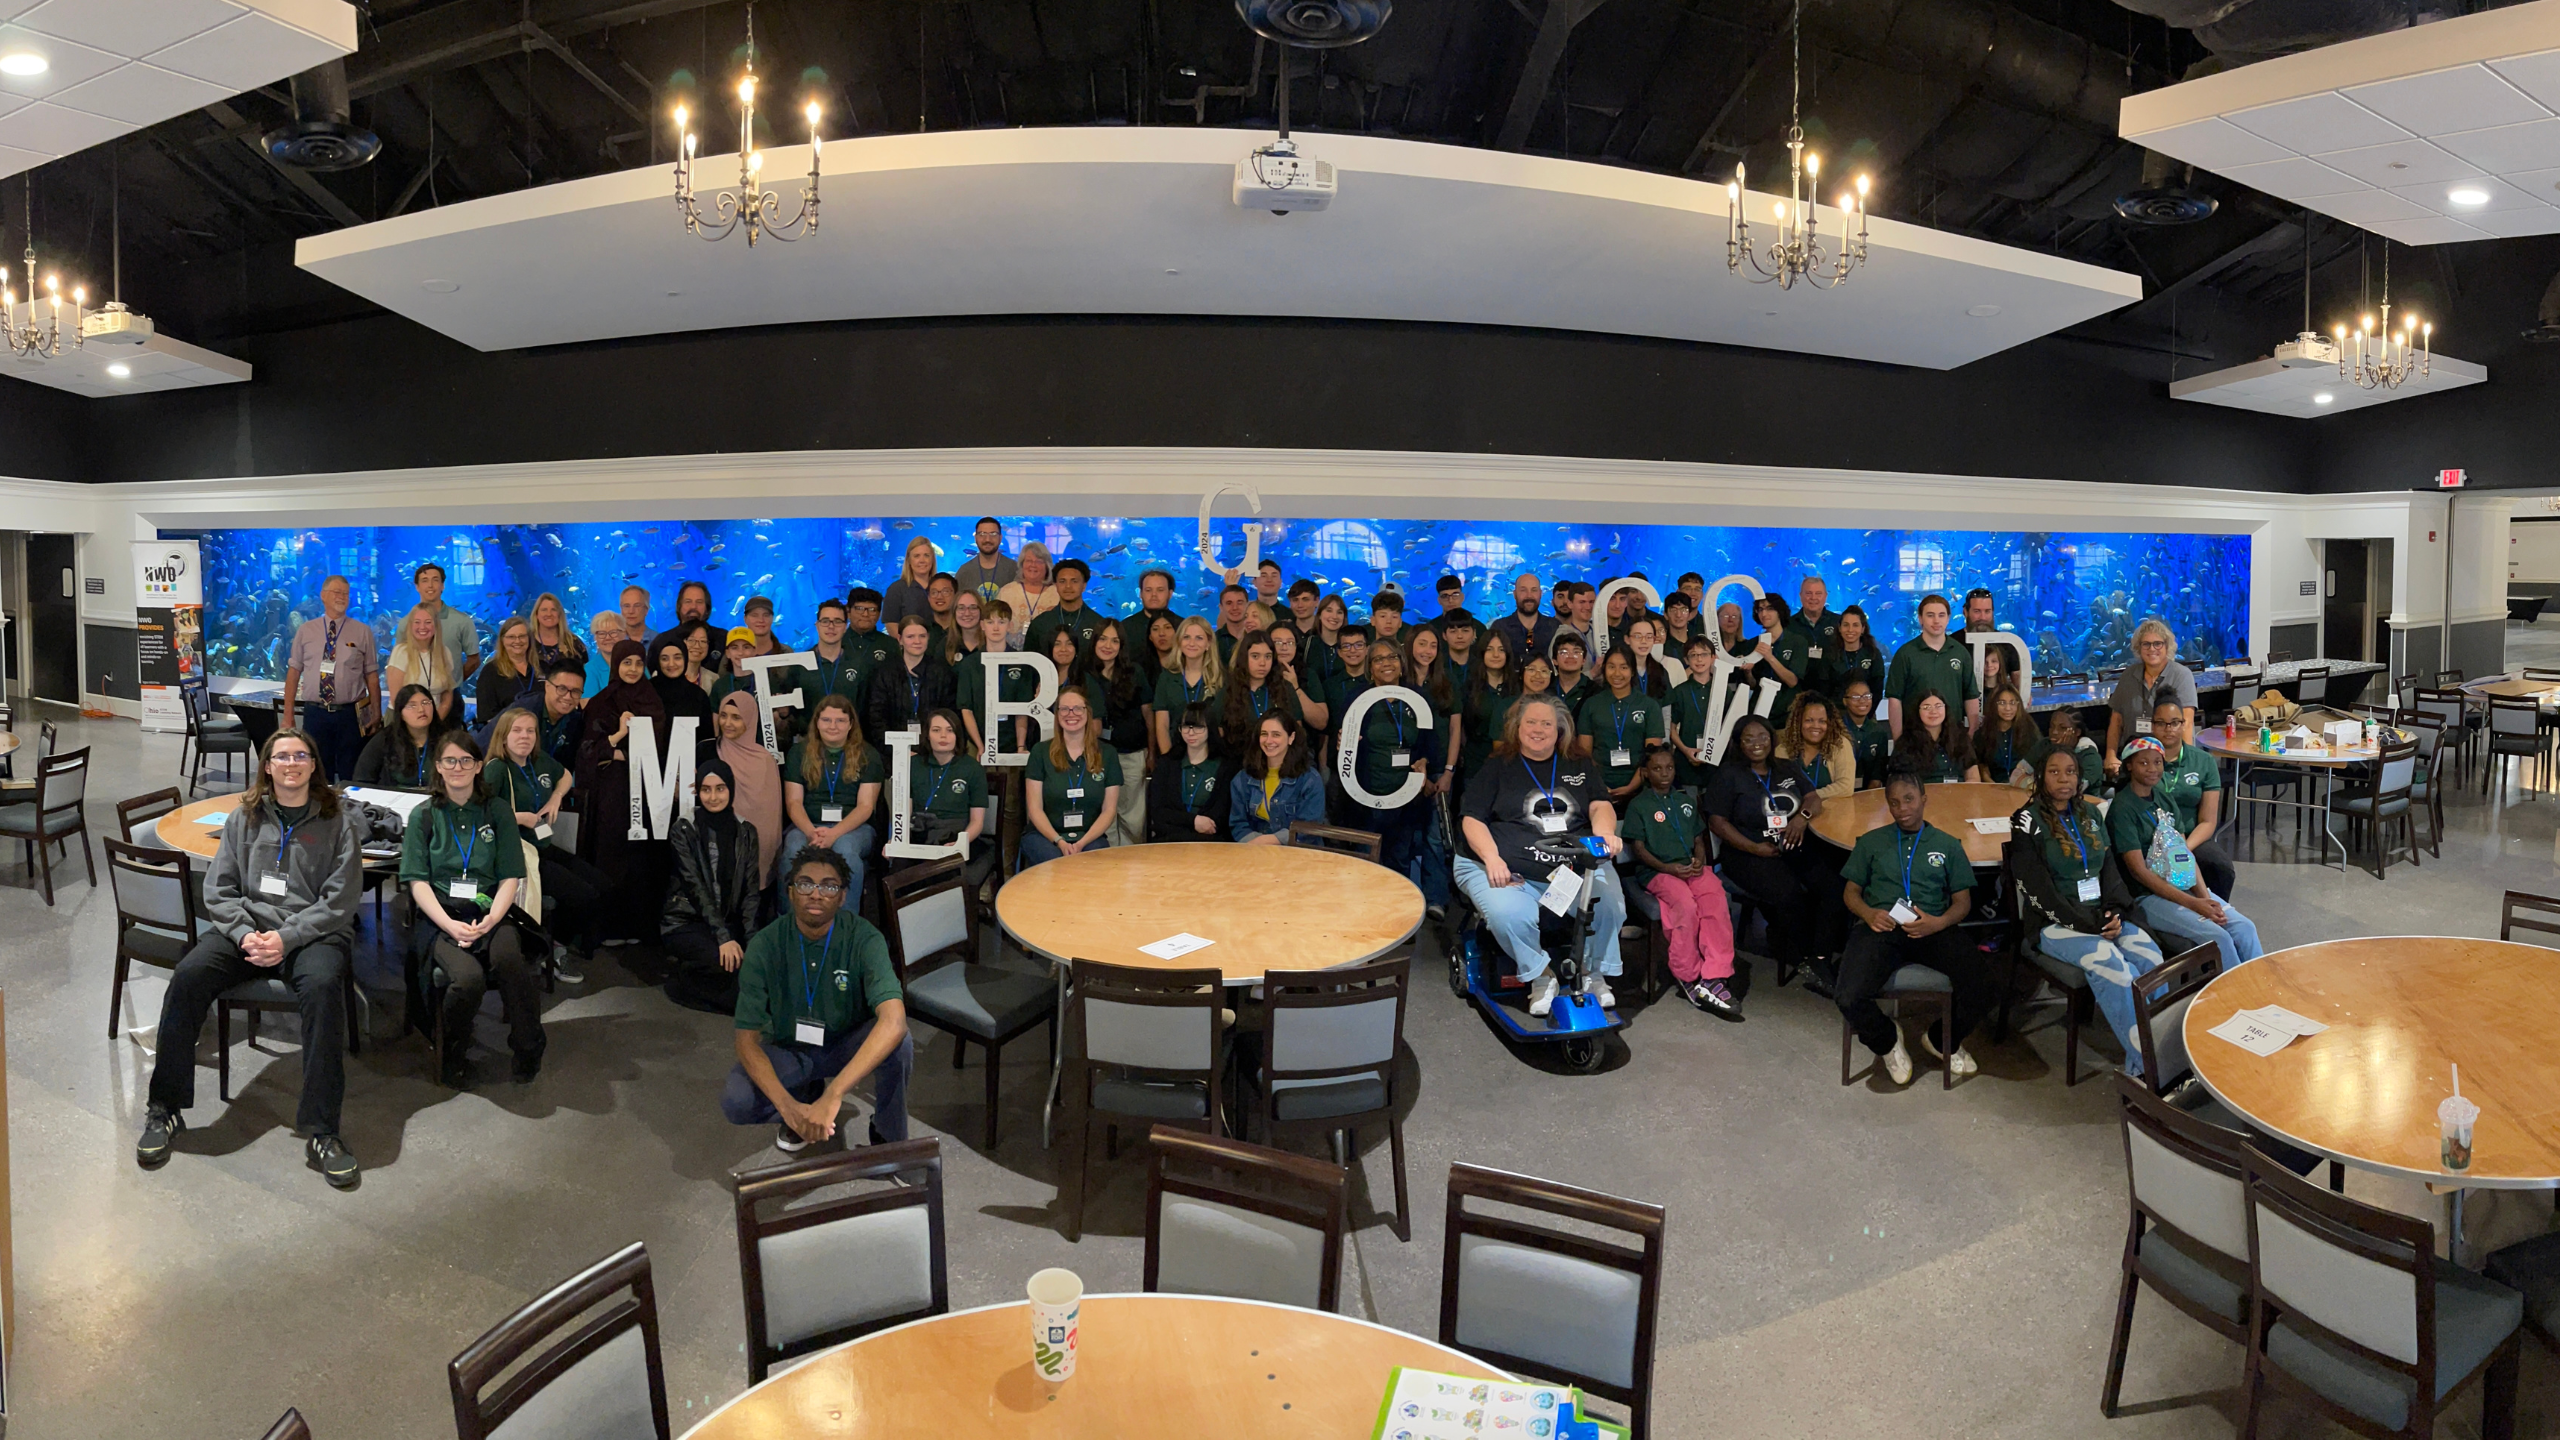 GLOBE students, educators and Partners pose in front of a fish tank in a meeting space at the Toledo Zoo and Aquarium